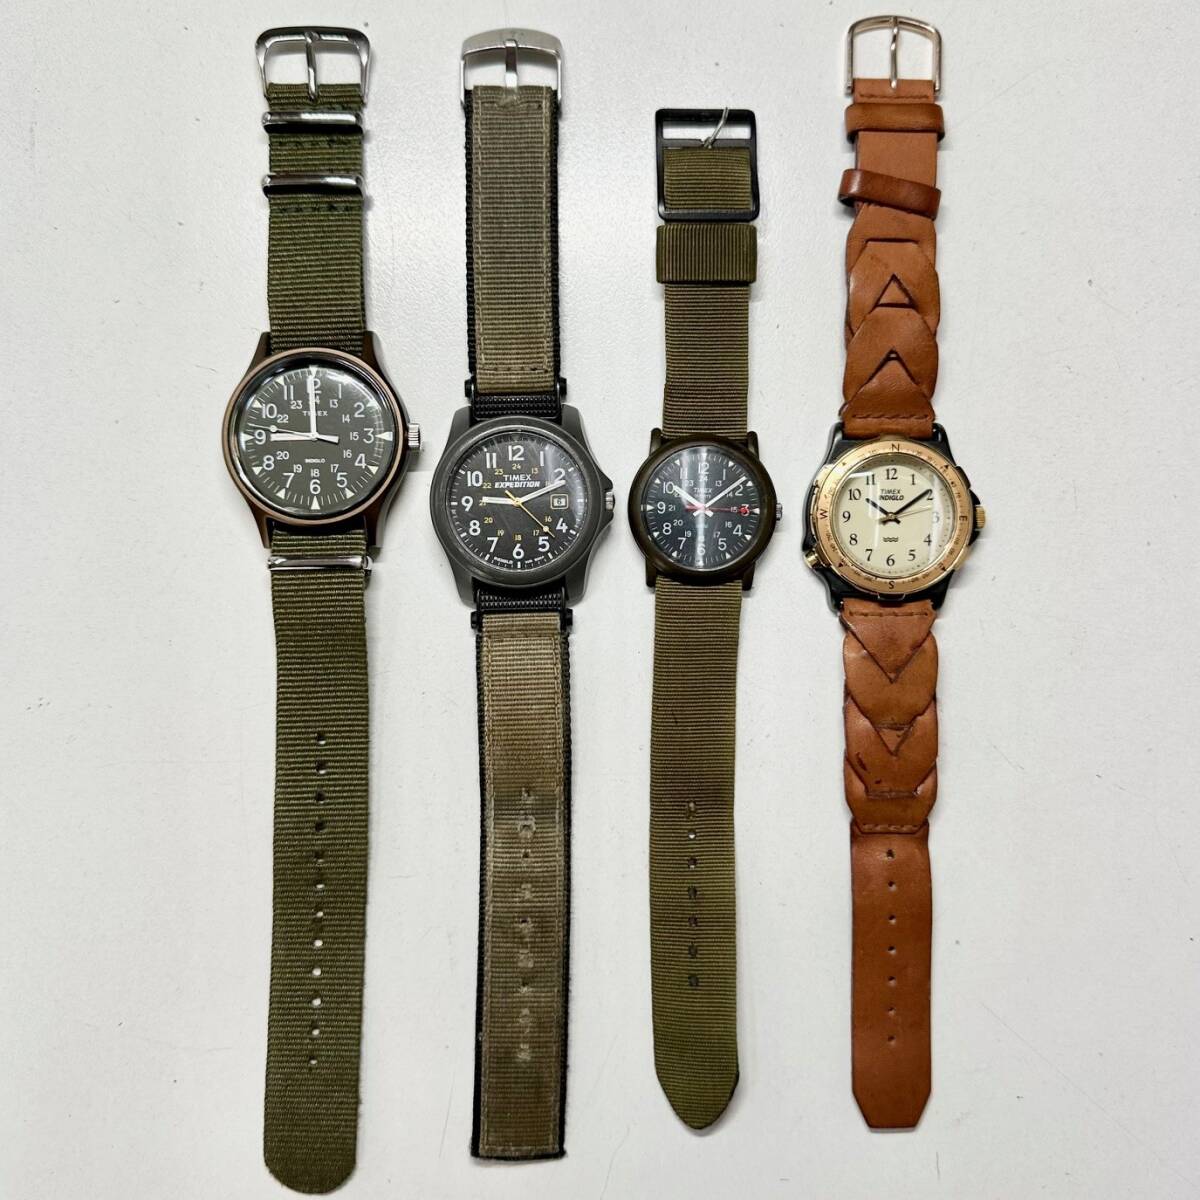 【TIMEX 腕時計まとめて4本】タイメックス INDIGLO WR30/EXPEDITION WR50M/395LA CELL/376MA CELL_画像2